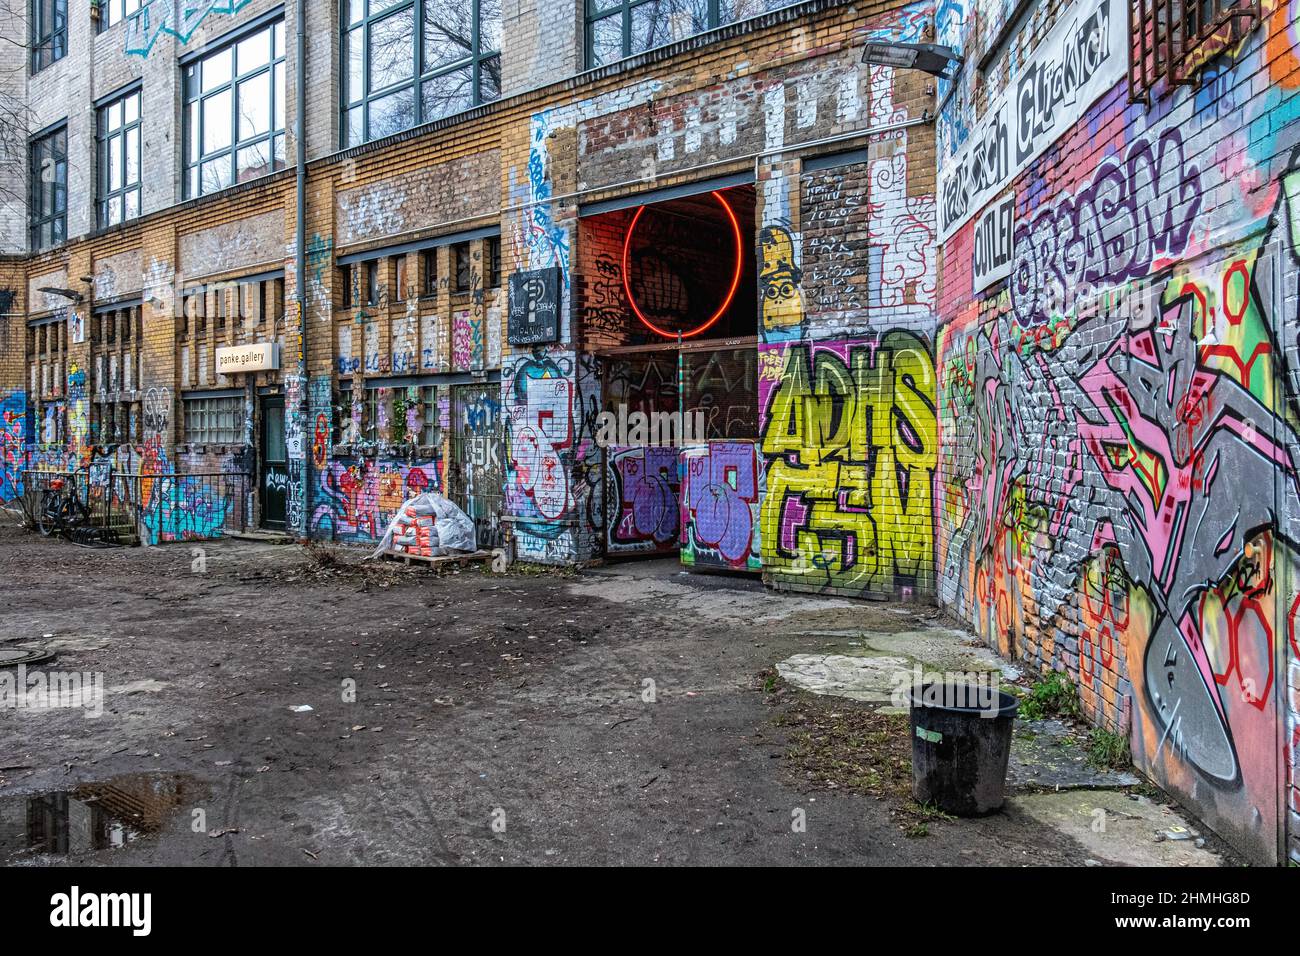 Wedding, Berlin. Entrance of dilapidated old industrial building next to Panke river at Gerichtstrasse 23. Residential & business use. Stock Photo